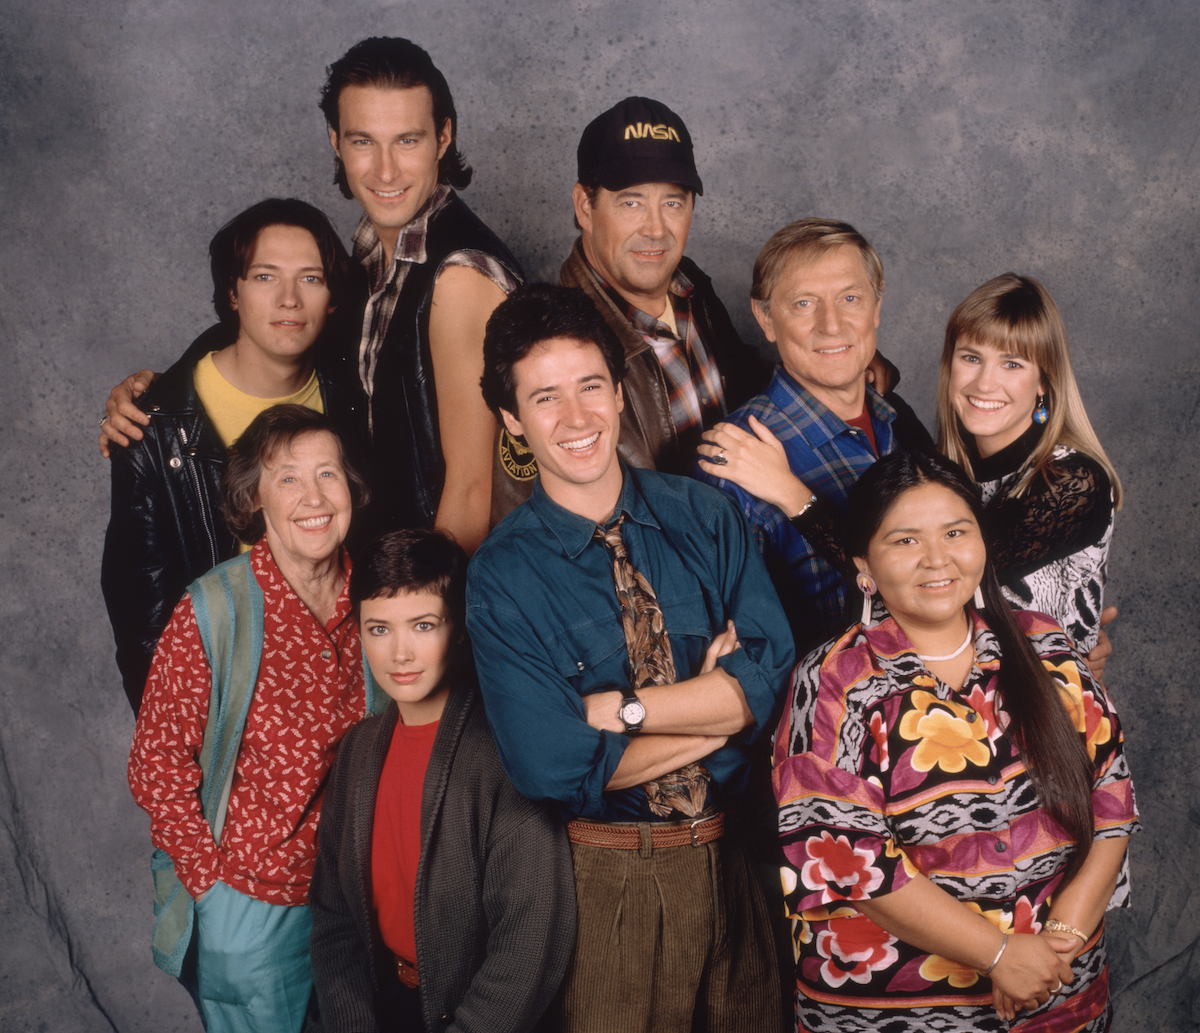 The cast of Northern Exposure poses for a photo